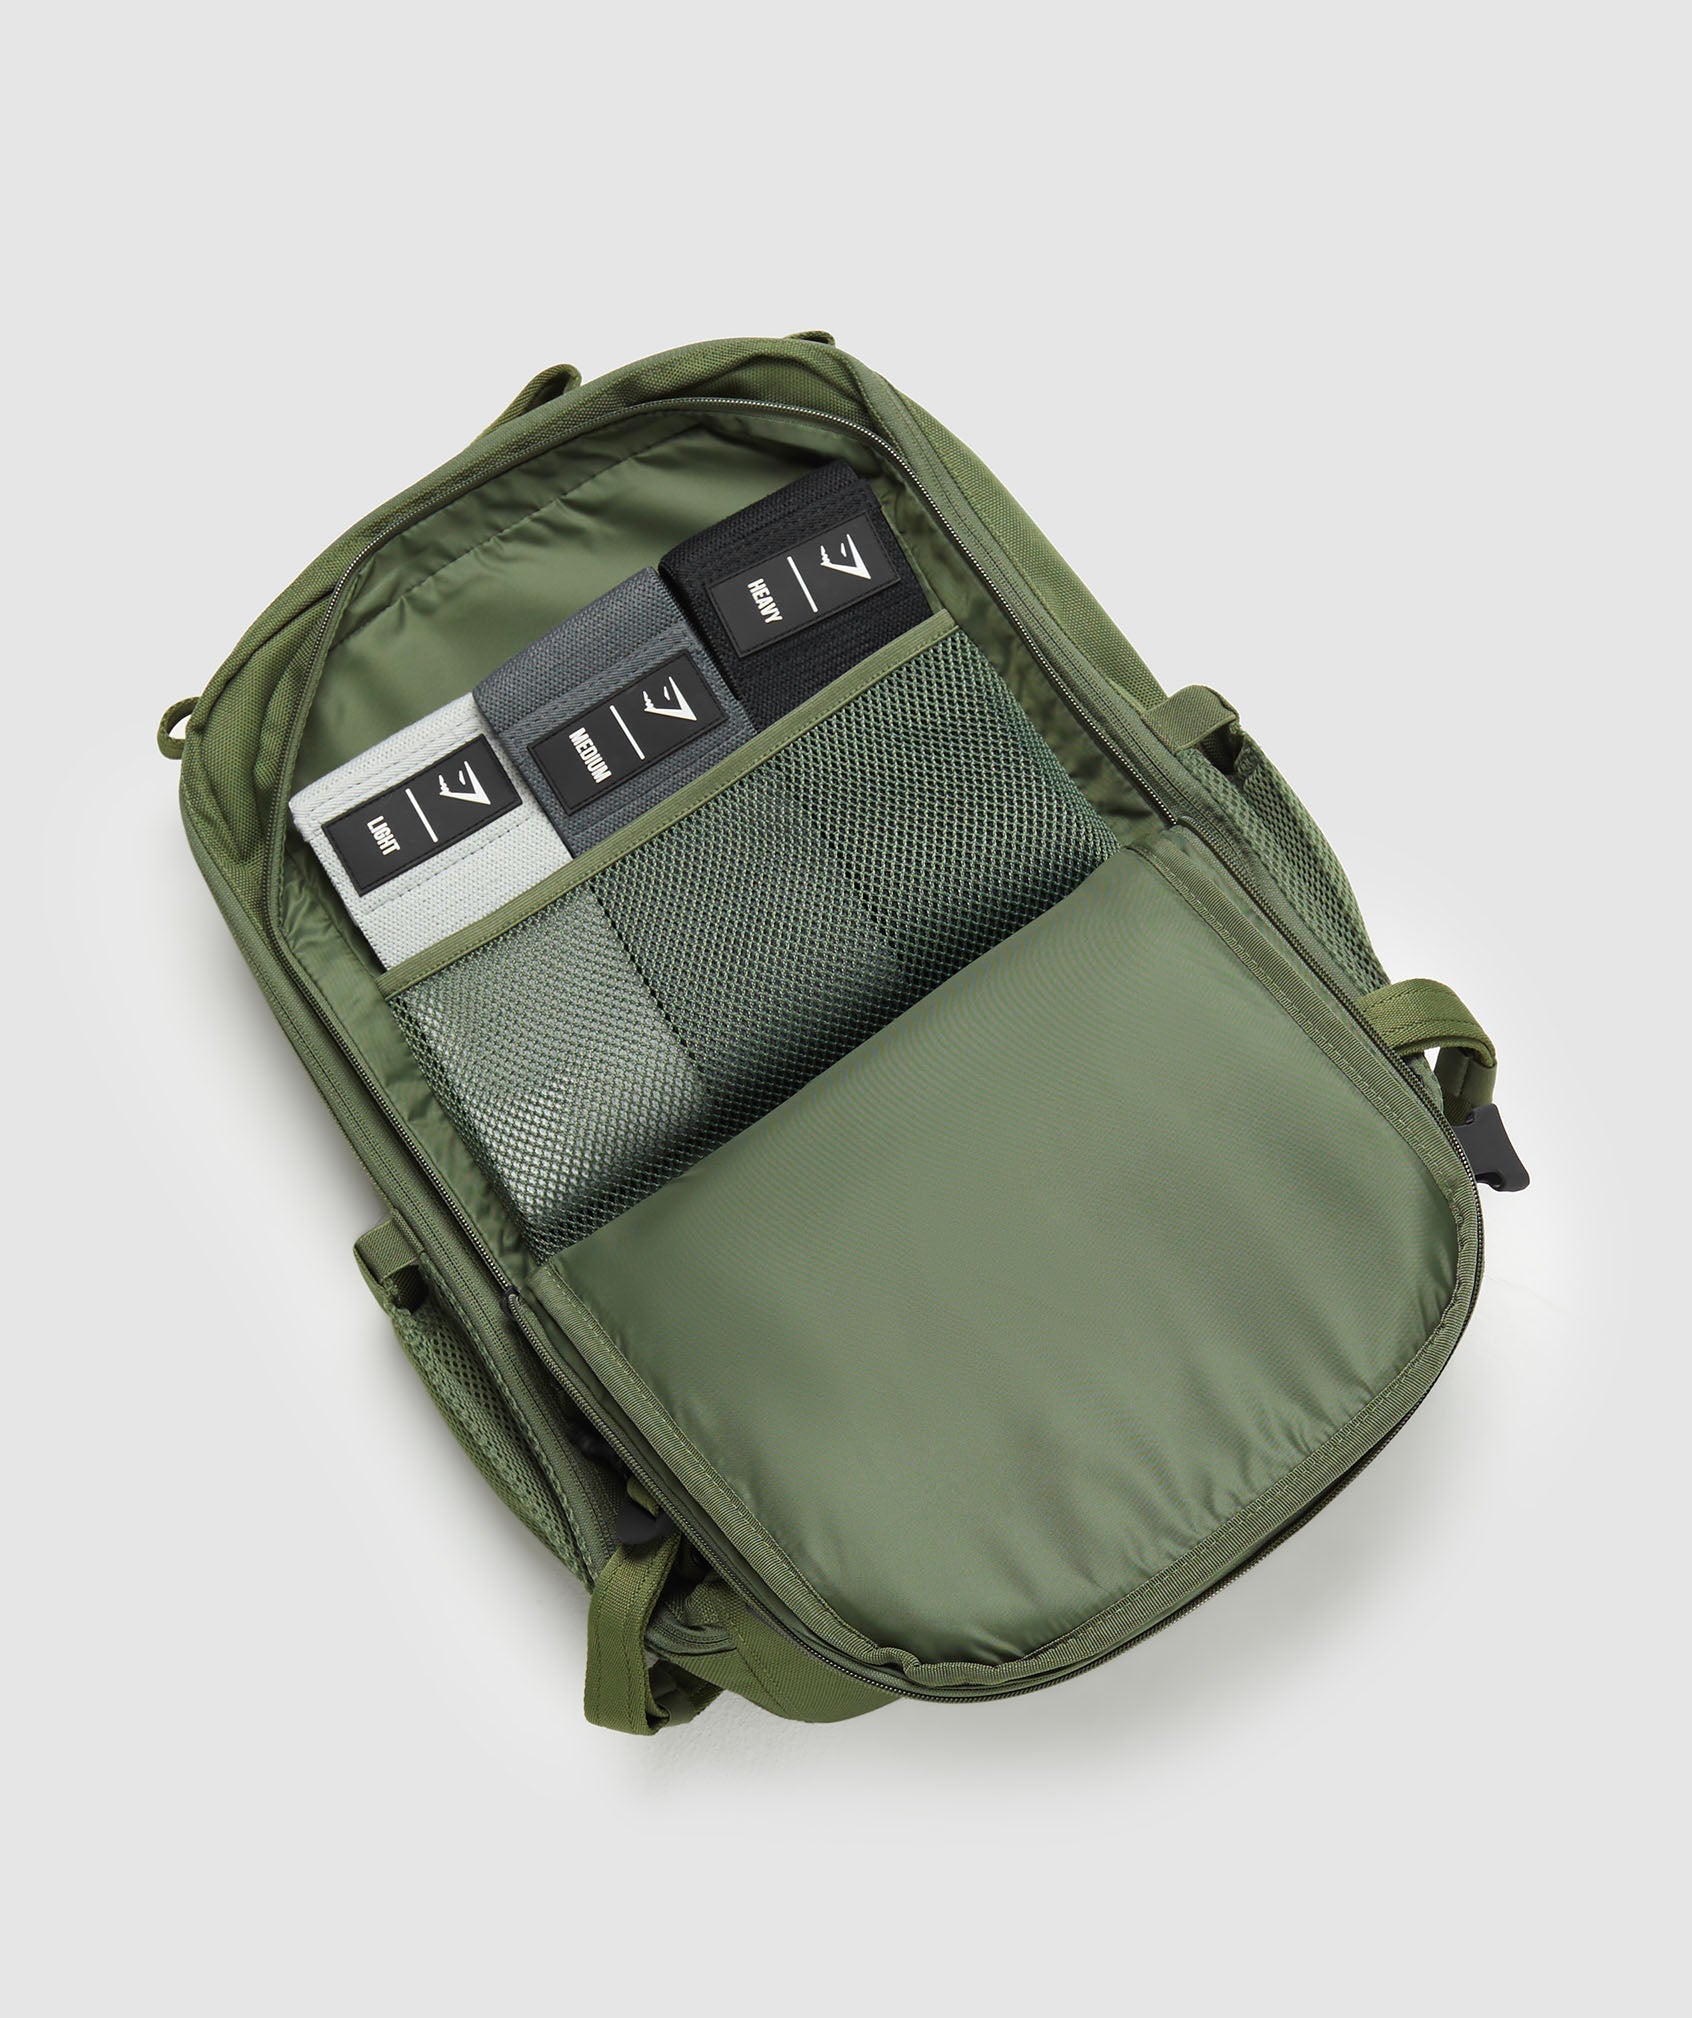 Tactical Backpack in Core Olive - view 9